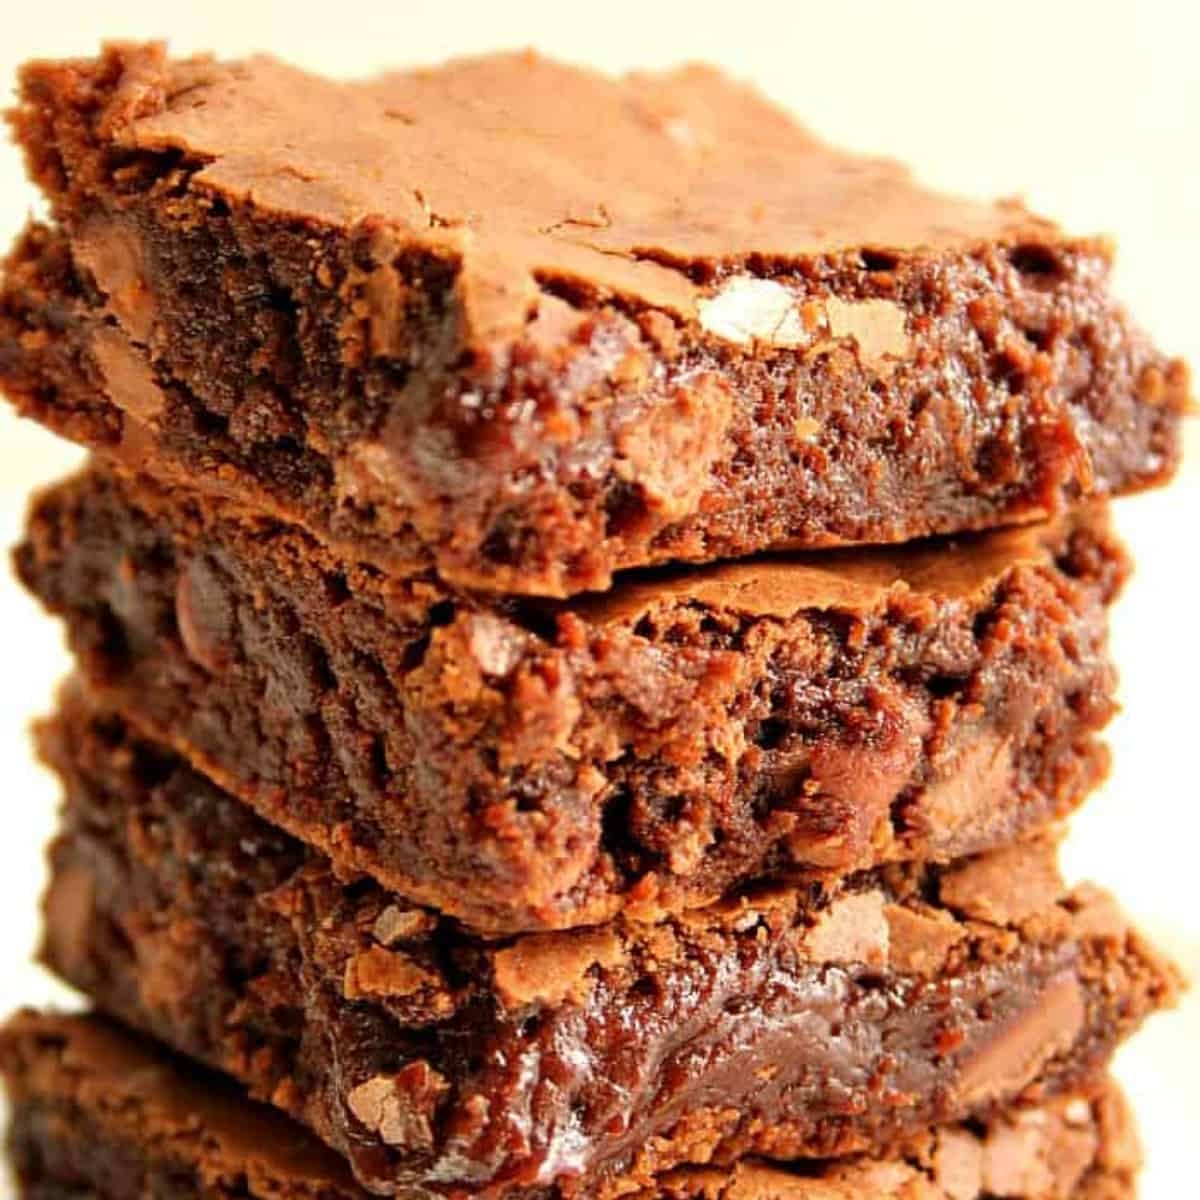 Brownies stacked.